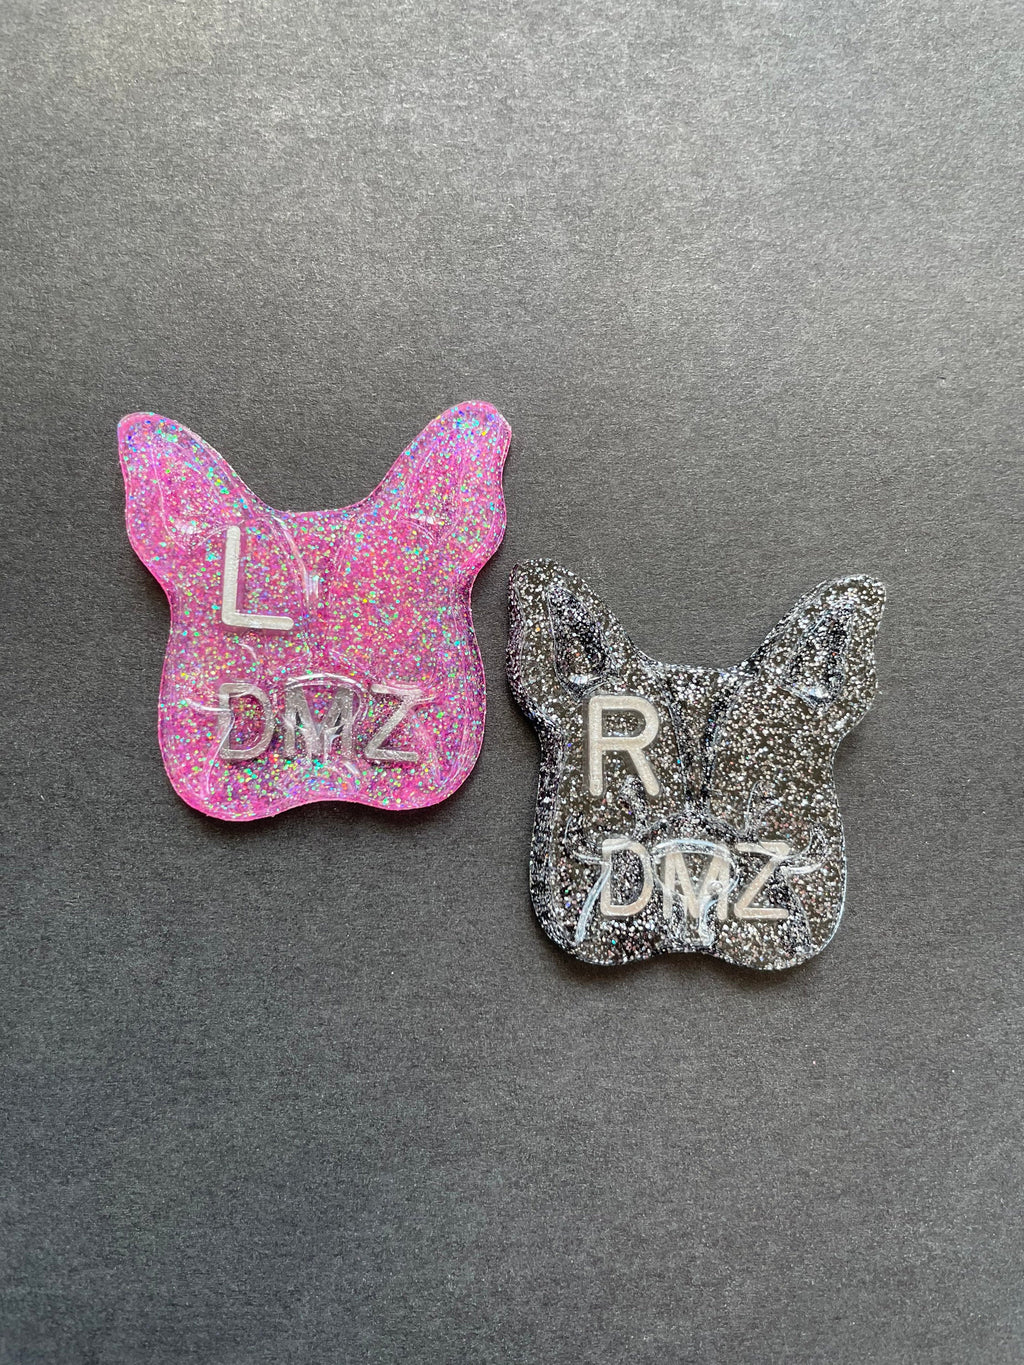 French Bulldog Xray Markers, With 2 or 3 Initials, Glitter, Dog, Frenchie